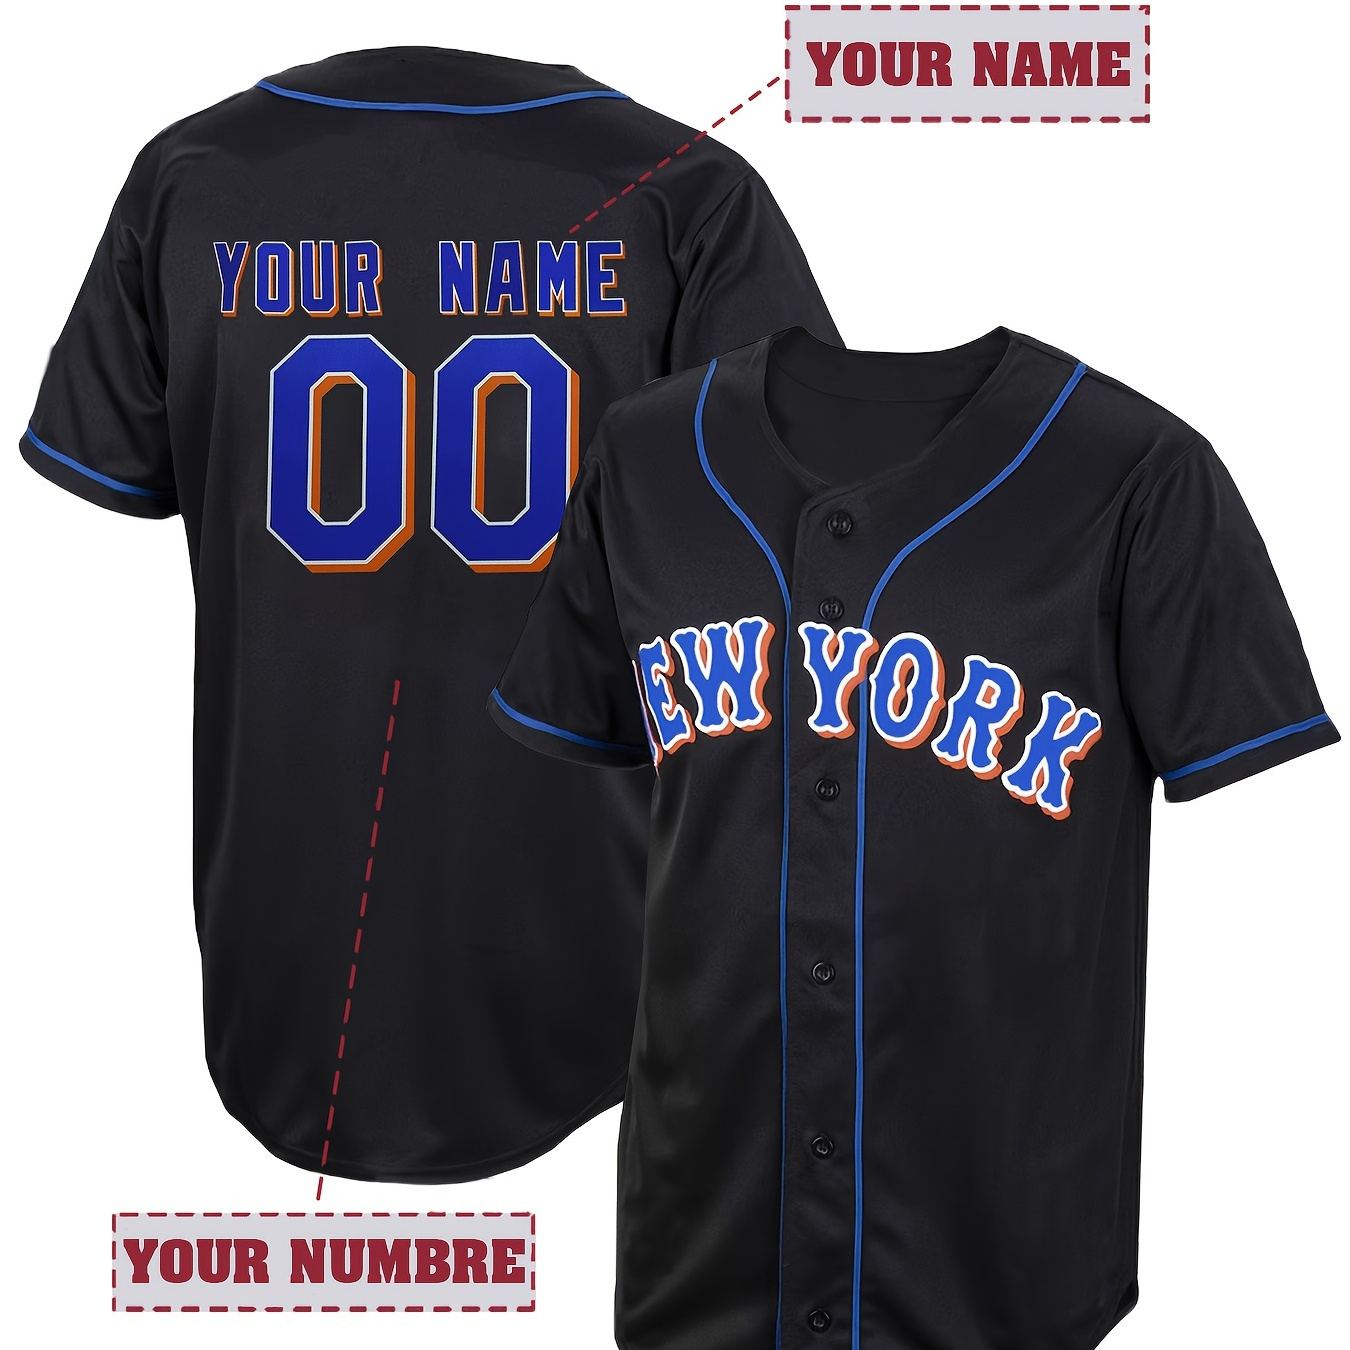 

Customized Name And Number Design, New York Men's Short Sleeve Loose V-neck Embroidery Baseball Jersey, Sports Shirt For Party And Training